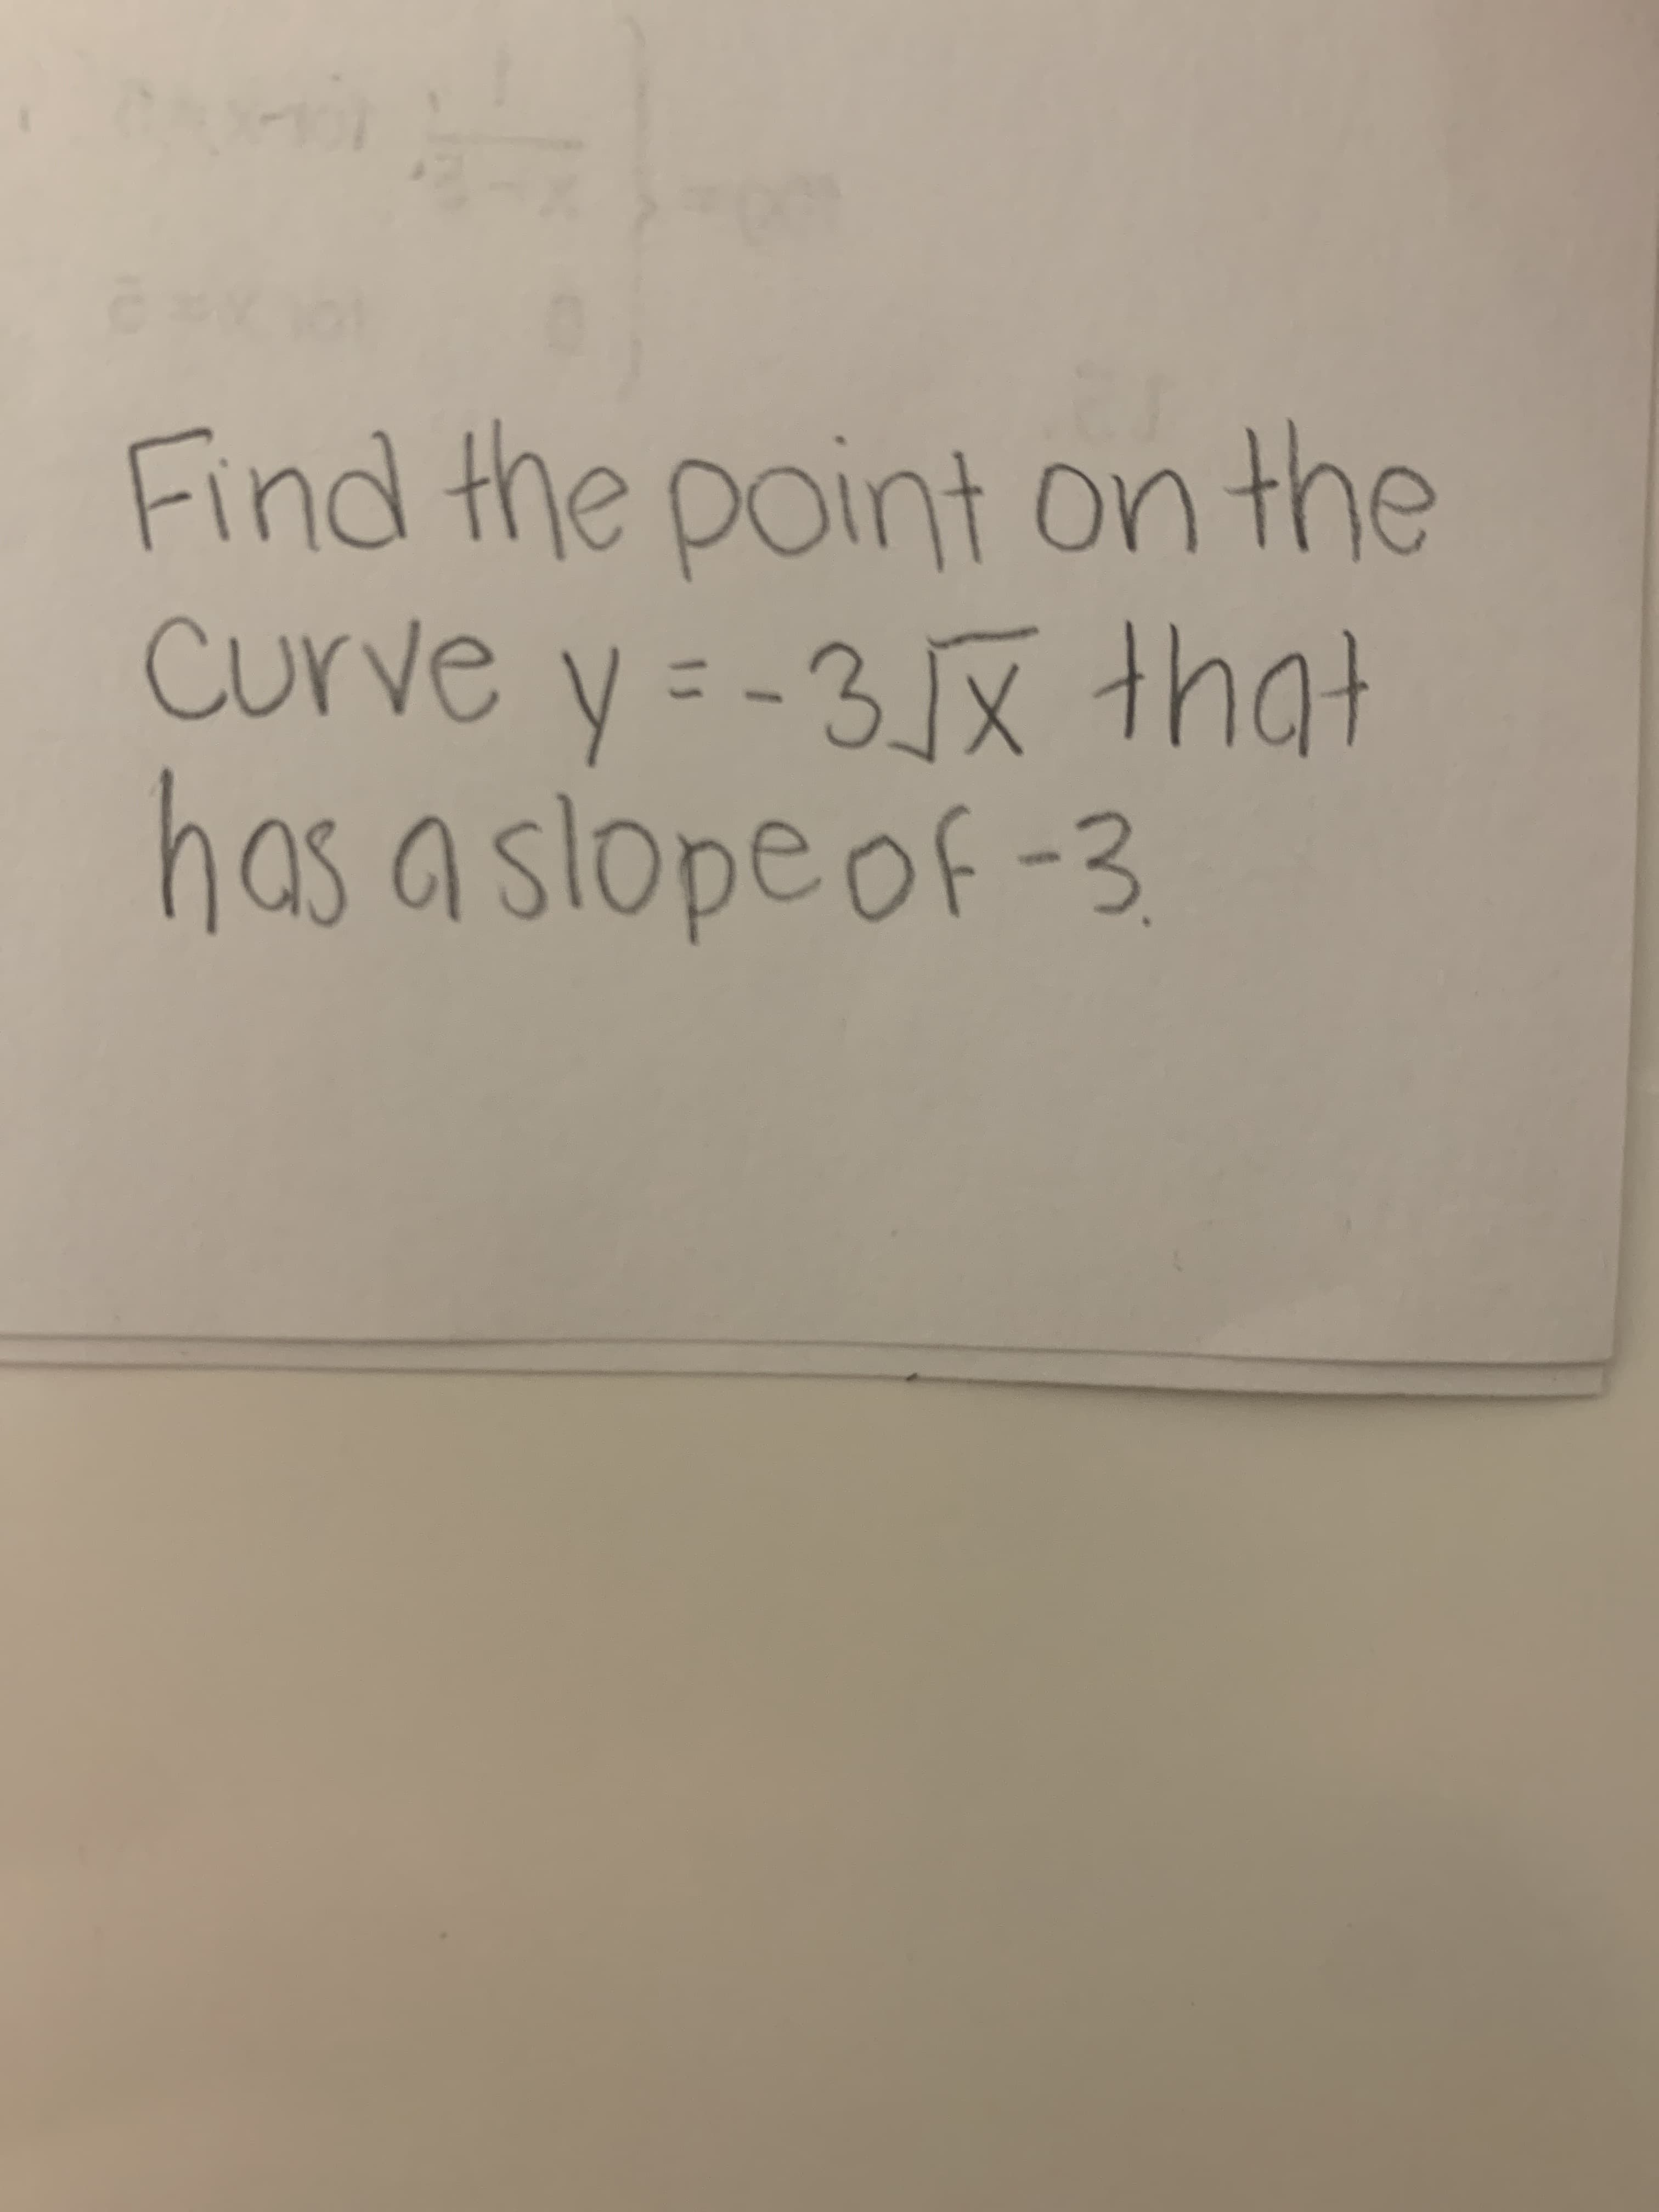 Find the point on the
Curve y =-3X that
has a slope of -3
10
